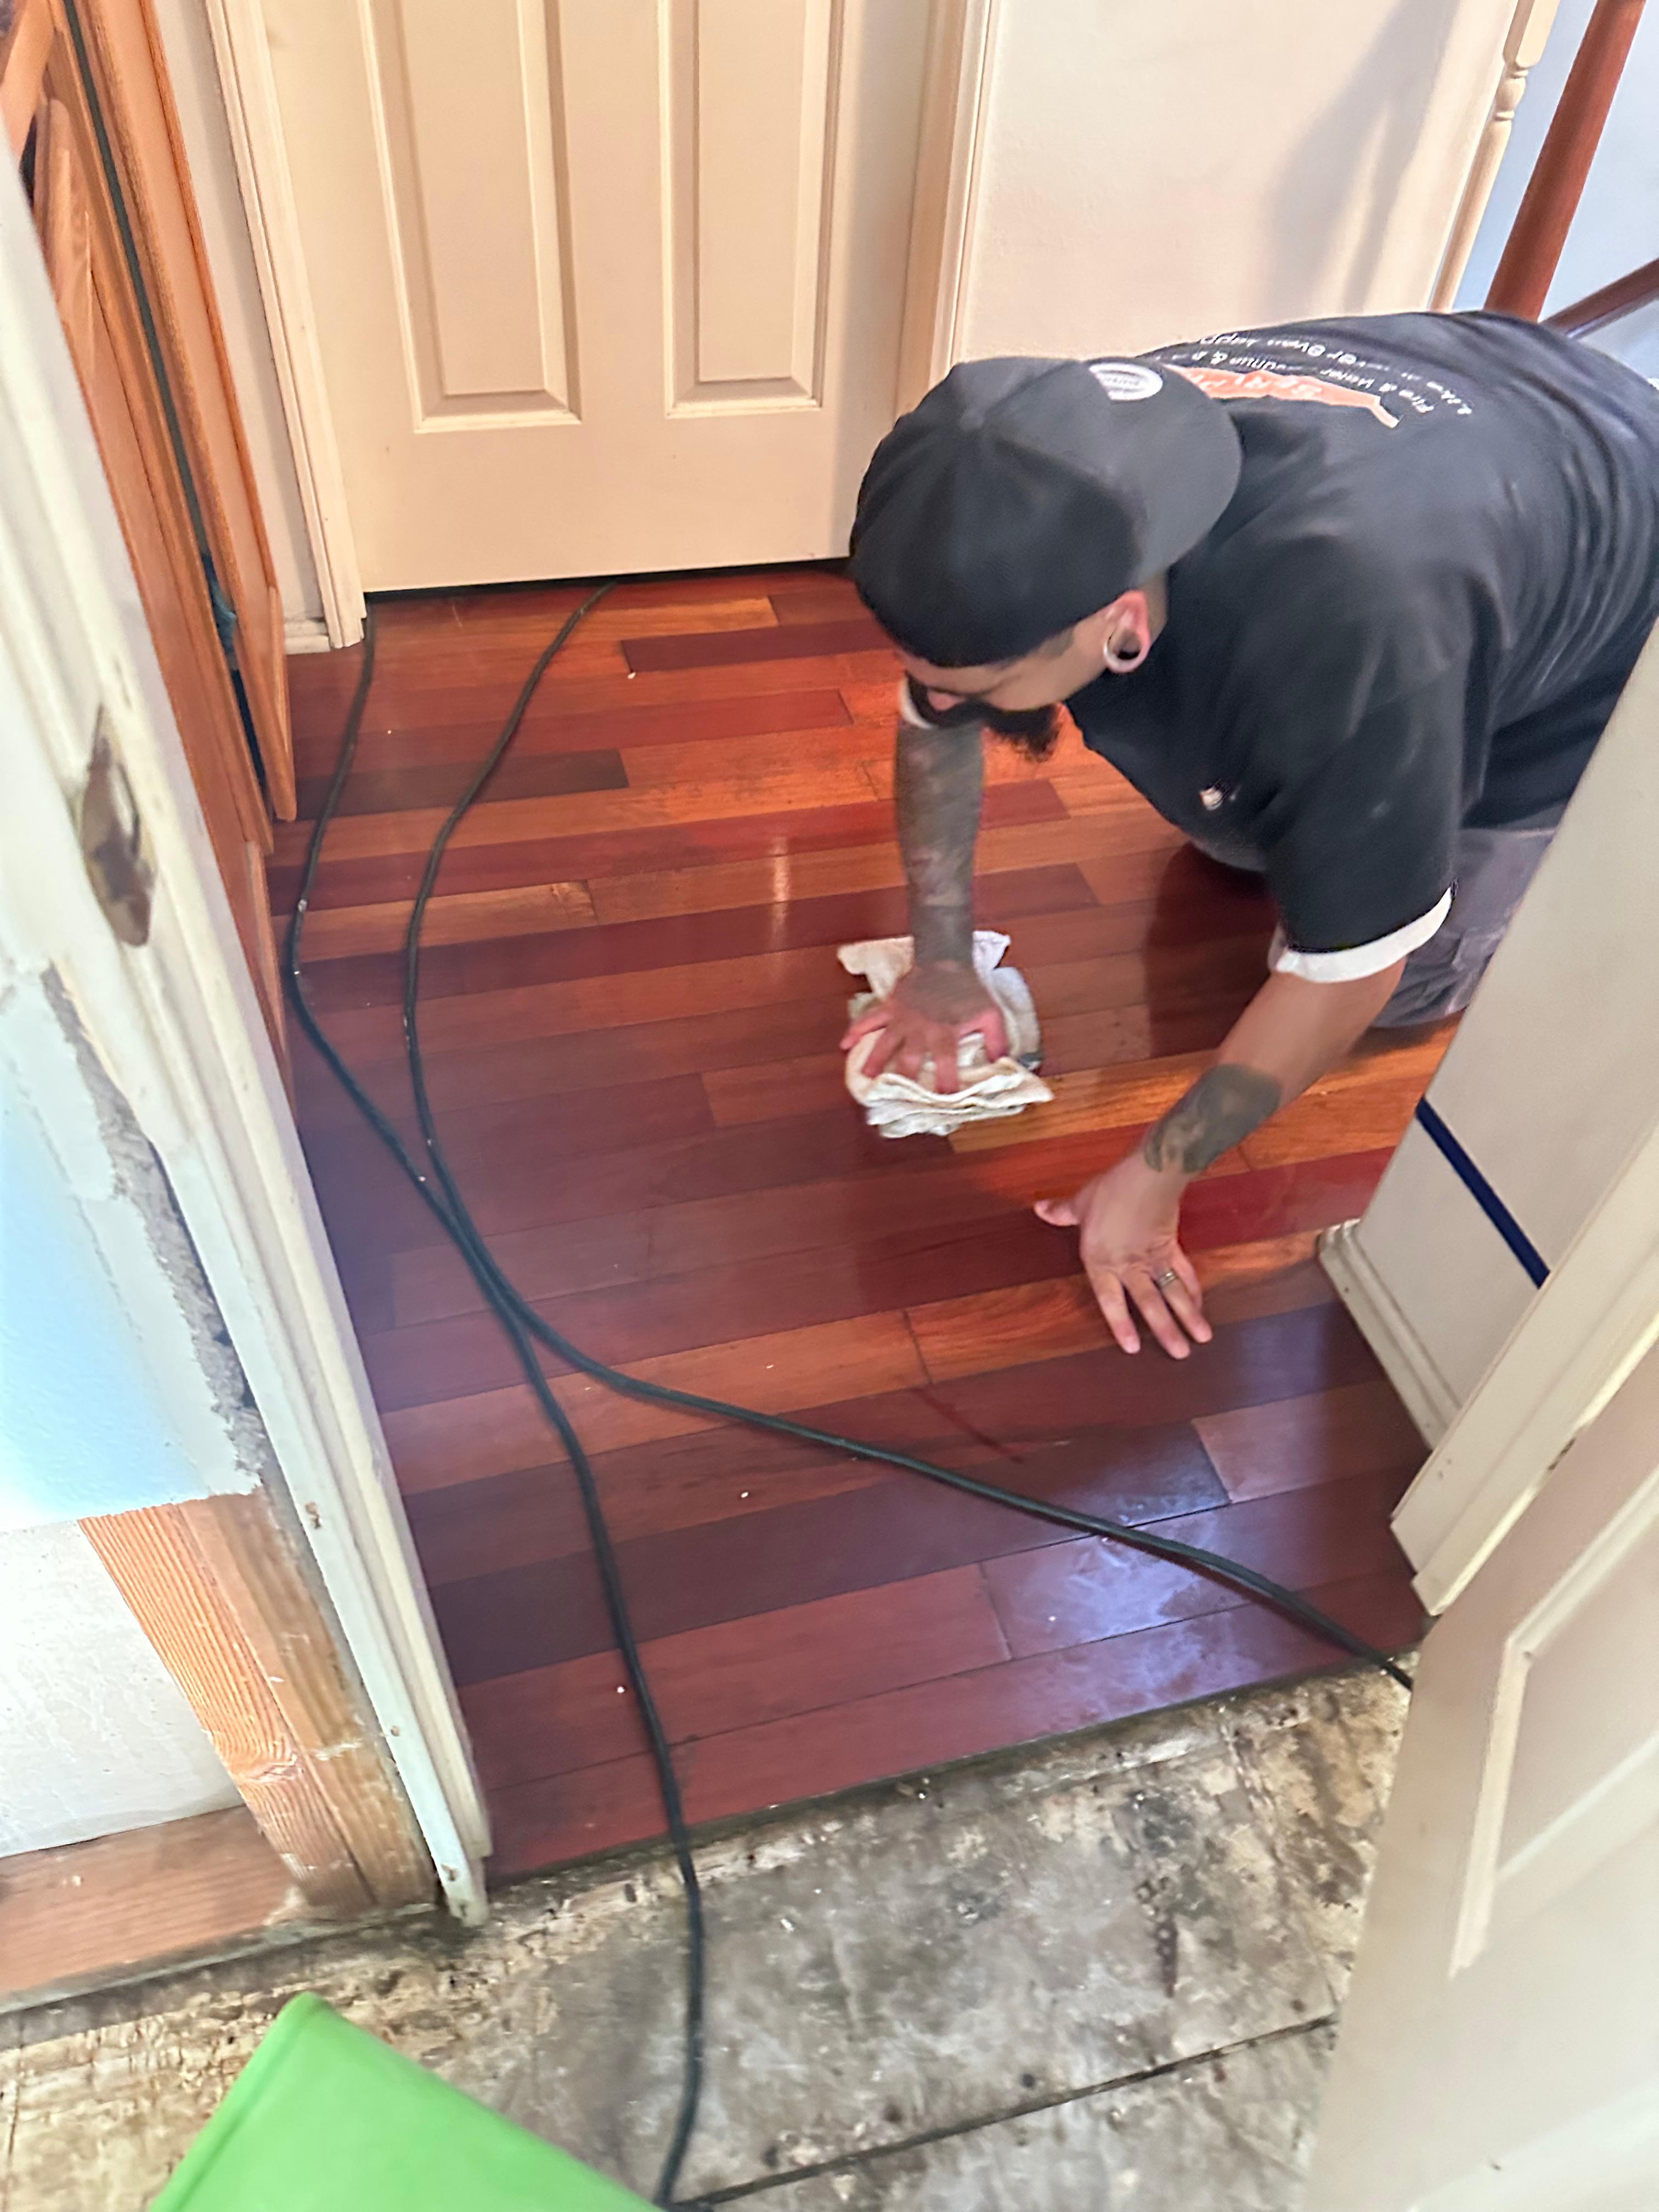 Disasters strike when we least expect them, but SERVPRO of Laguna Beach/ Dana Point is here to help you bounce back. Our skilled technicians are trained to handle any water, mold, or fire damage situation, using advanced techniques and equipment to restore your property efficiently. Don't let a disaster define your home - trust SERVPRO to restore it to its pre -loss condition. Call us today!